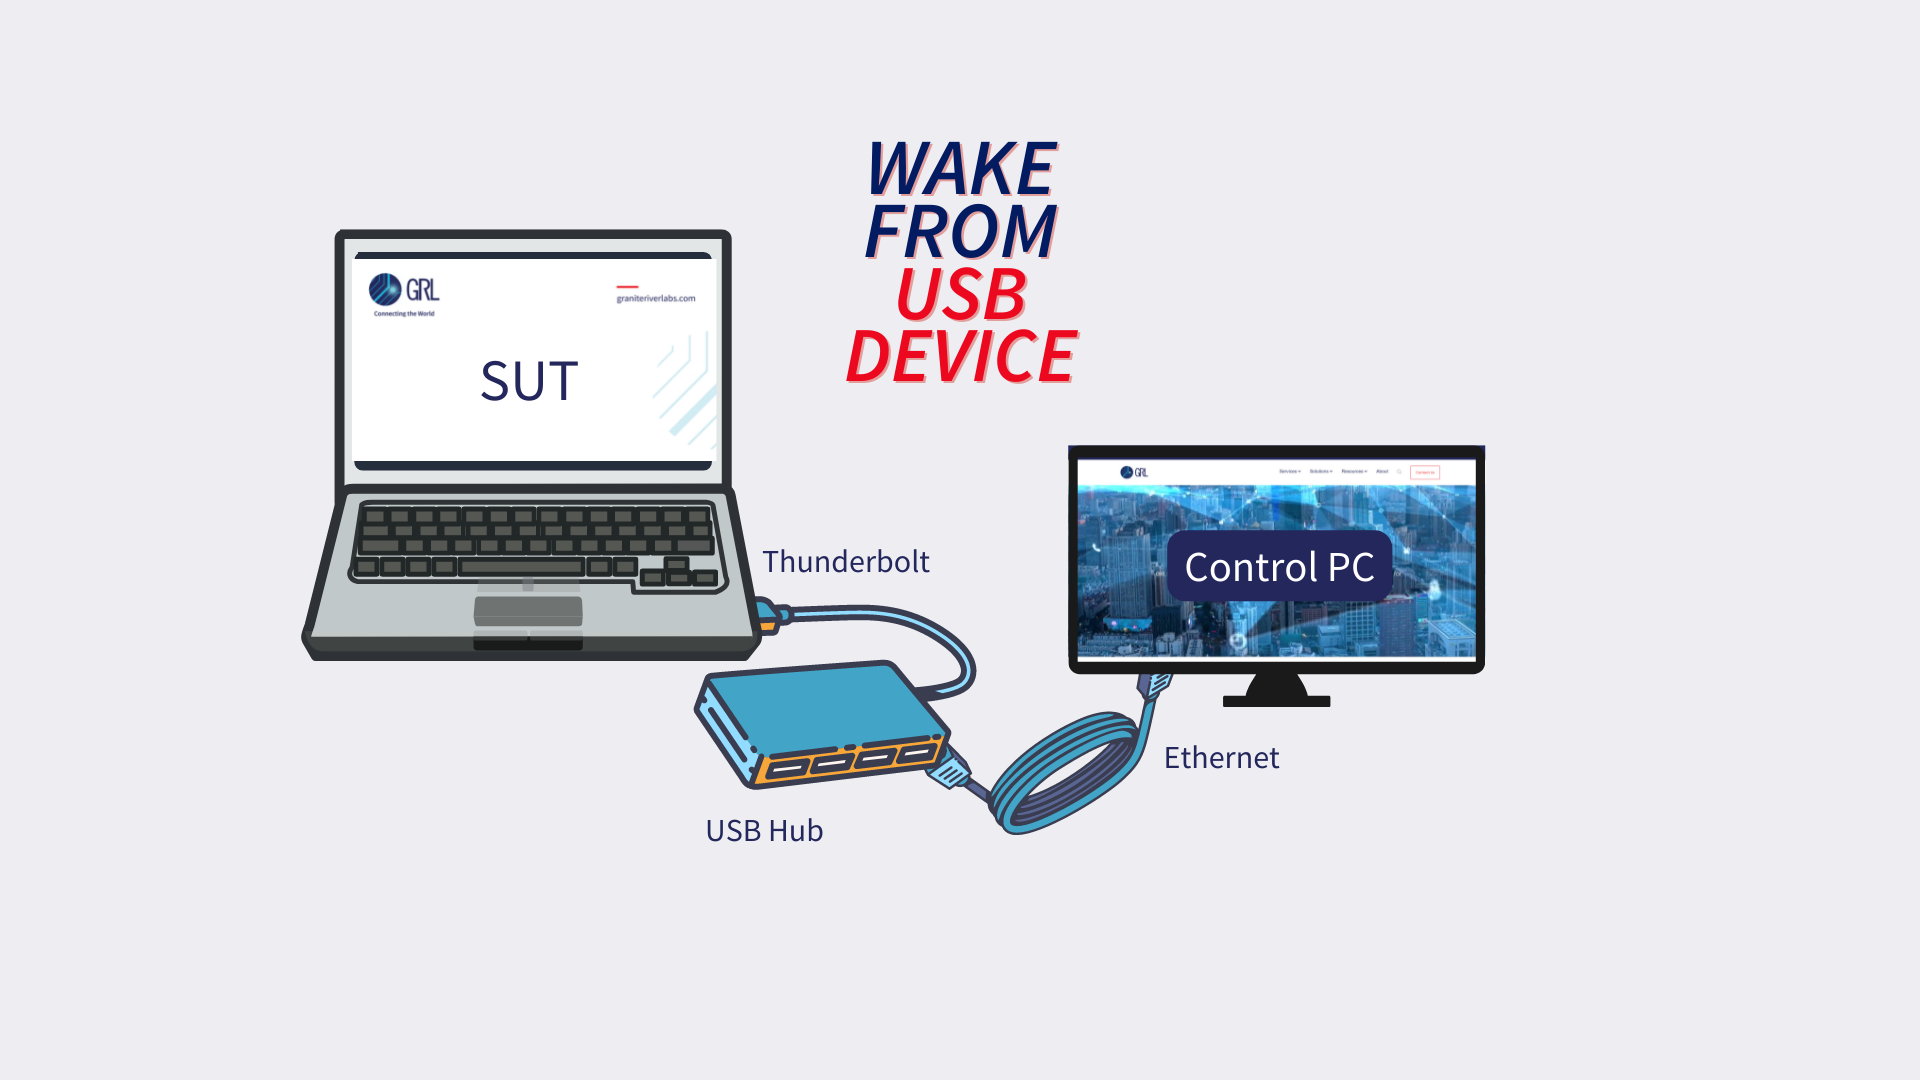 Diagram depicting Wake from USB device connection when USB hub is used to connect a control PC with SUT